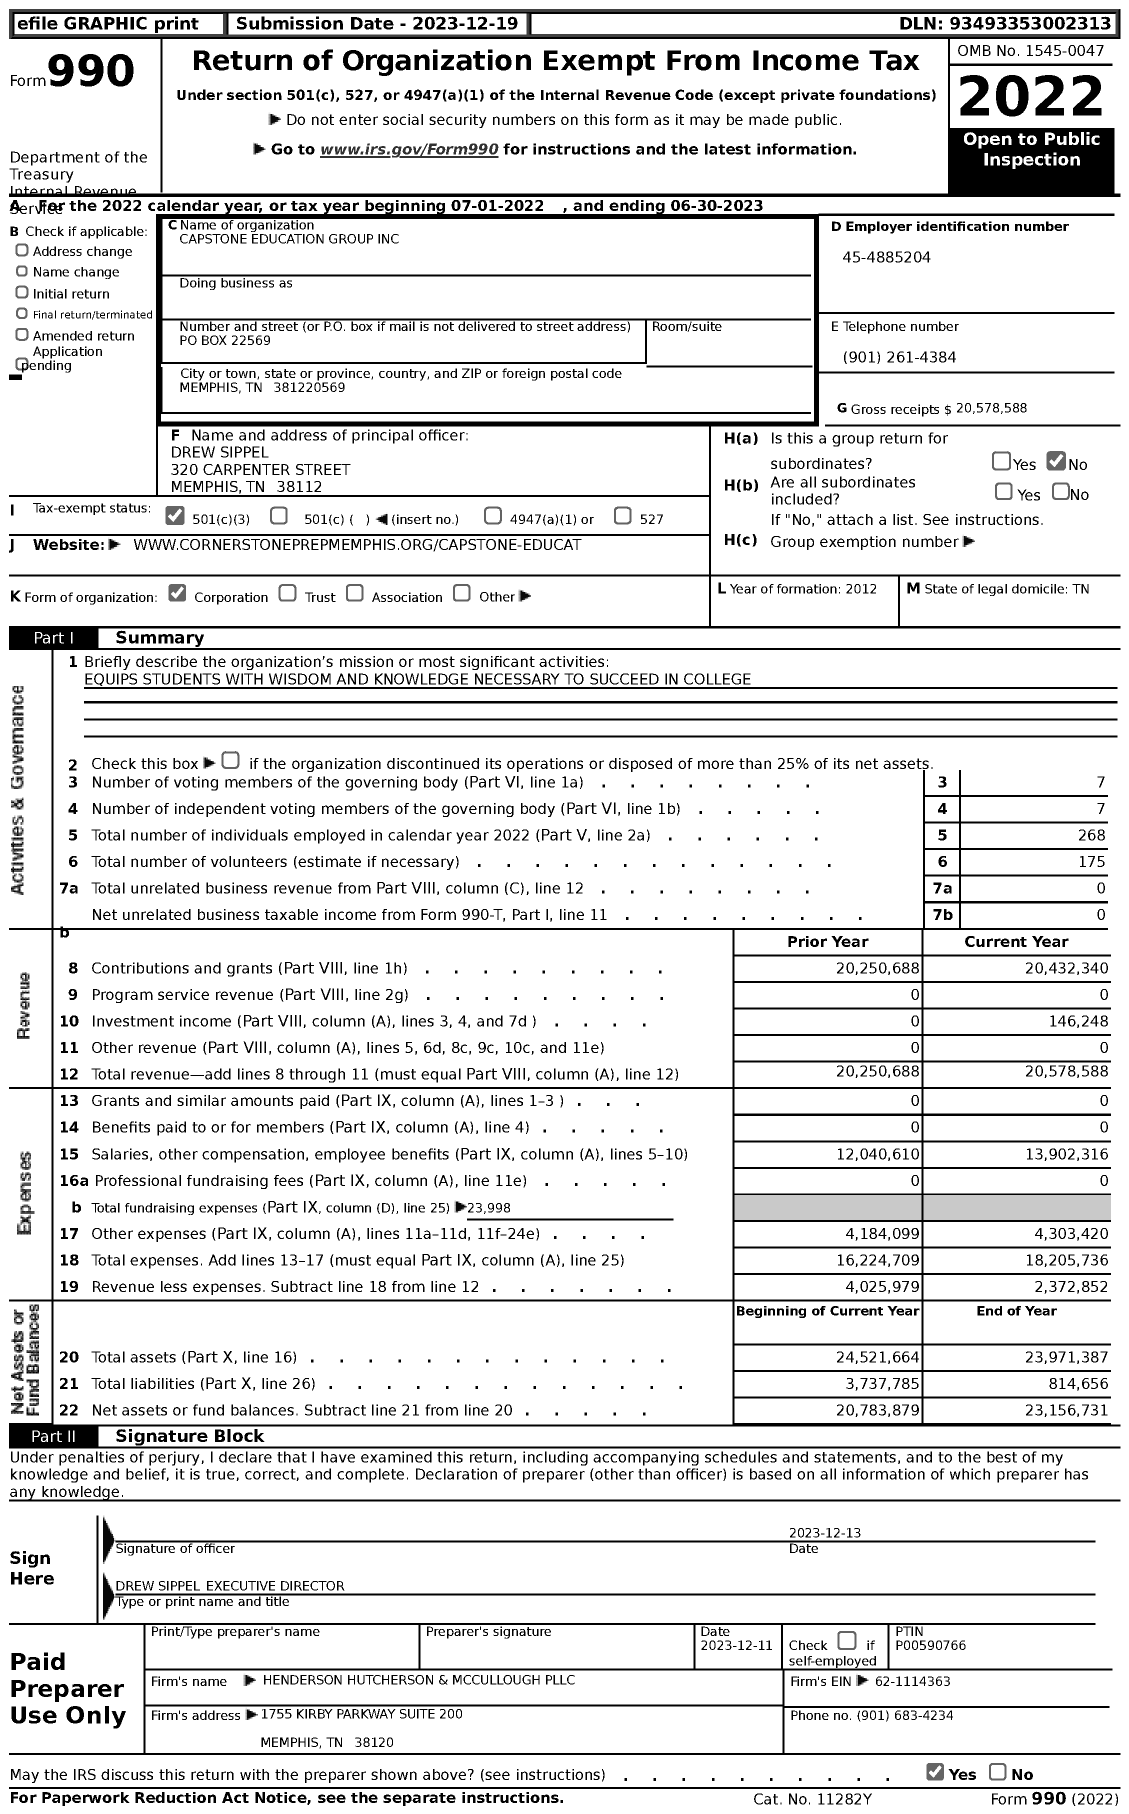 Image of first page of 2022 Form 990 for Capstone Education Group (CEG)